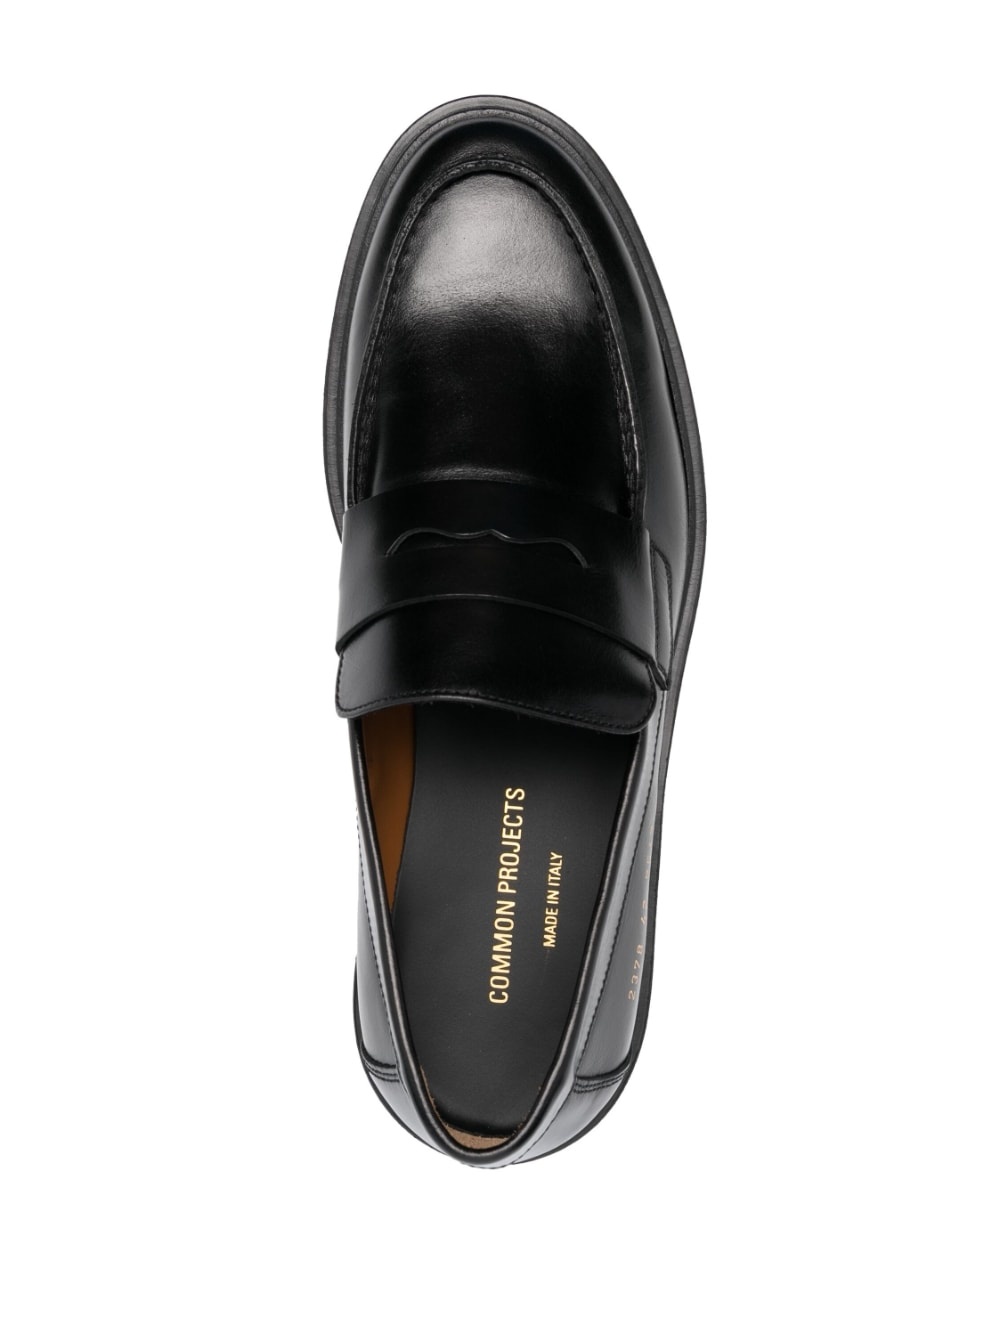 penny-slot leather loafers - 4